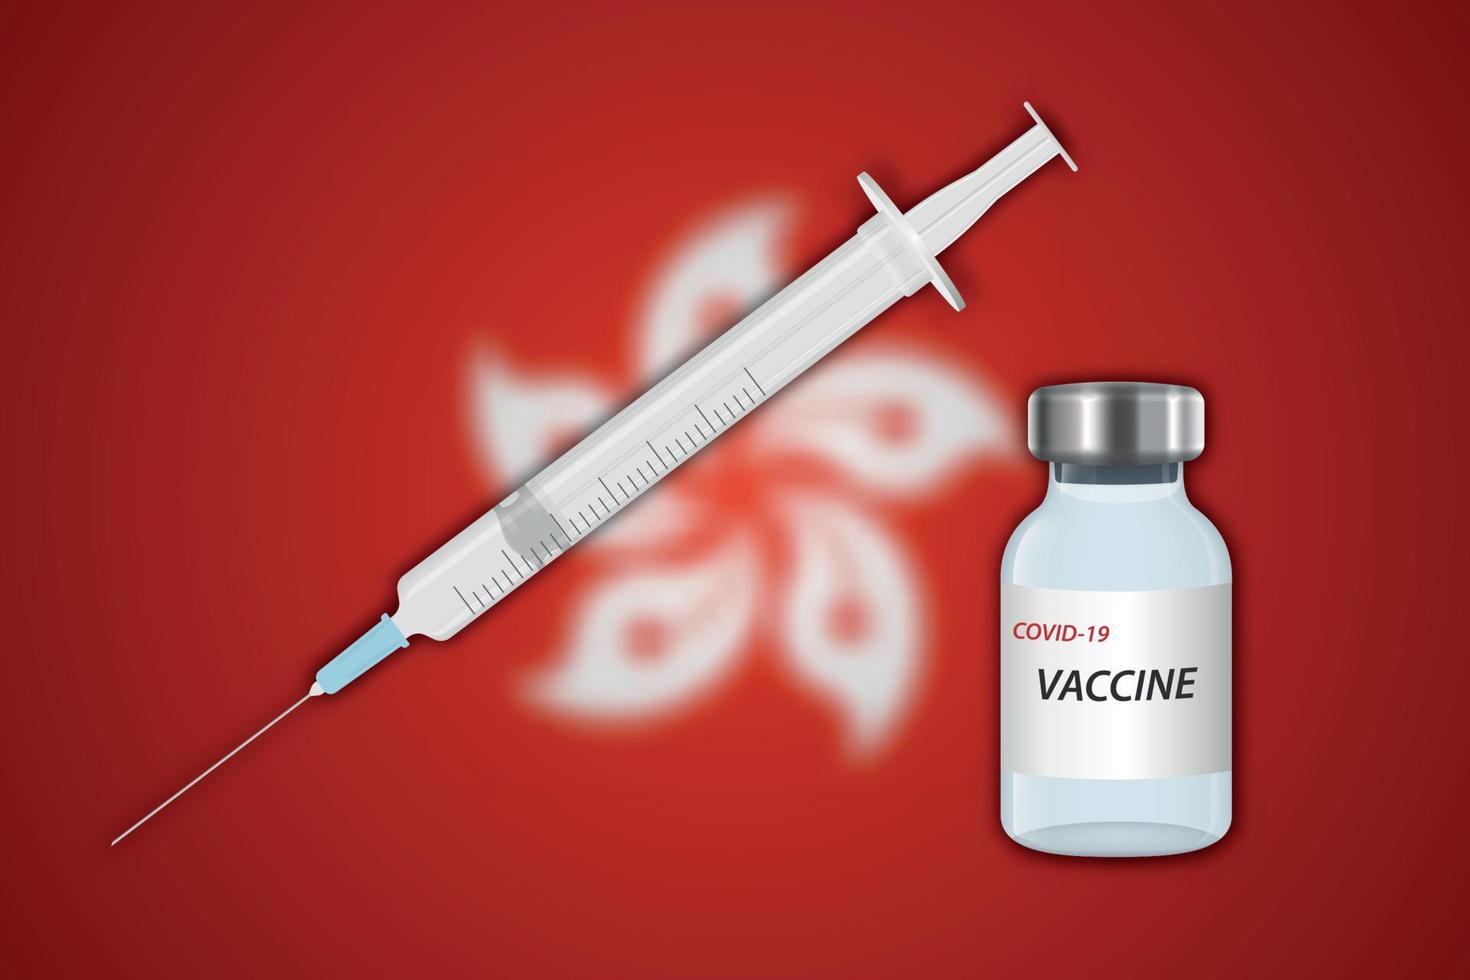 Syringe and vaccine vial on blur background with Hong Kong flag vector